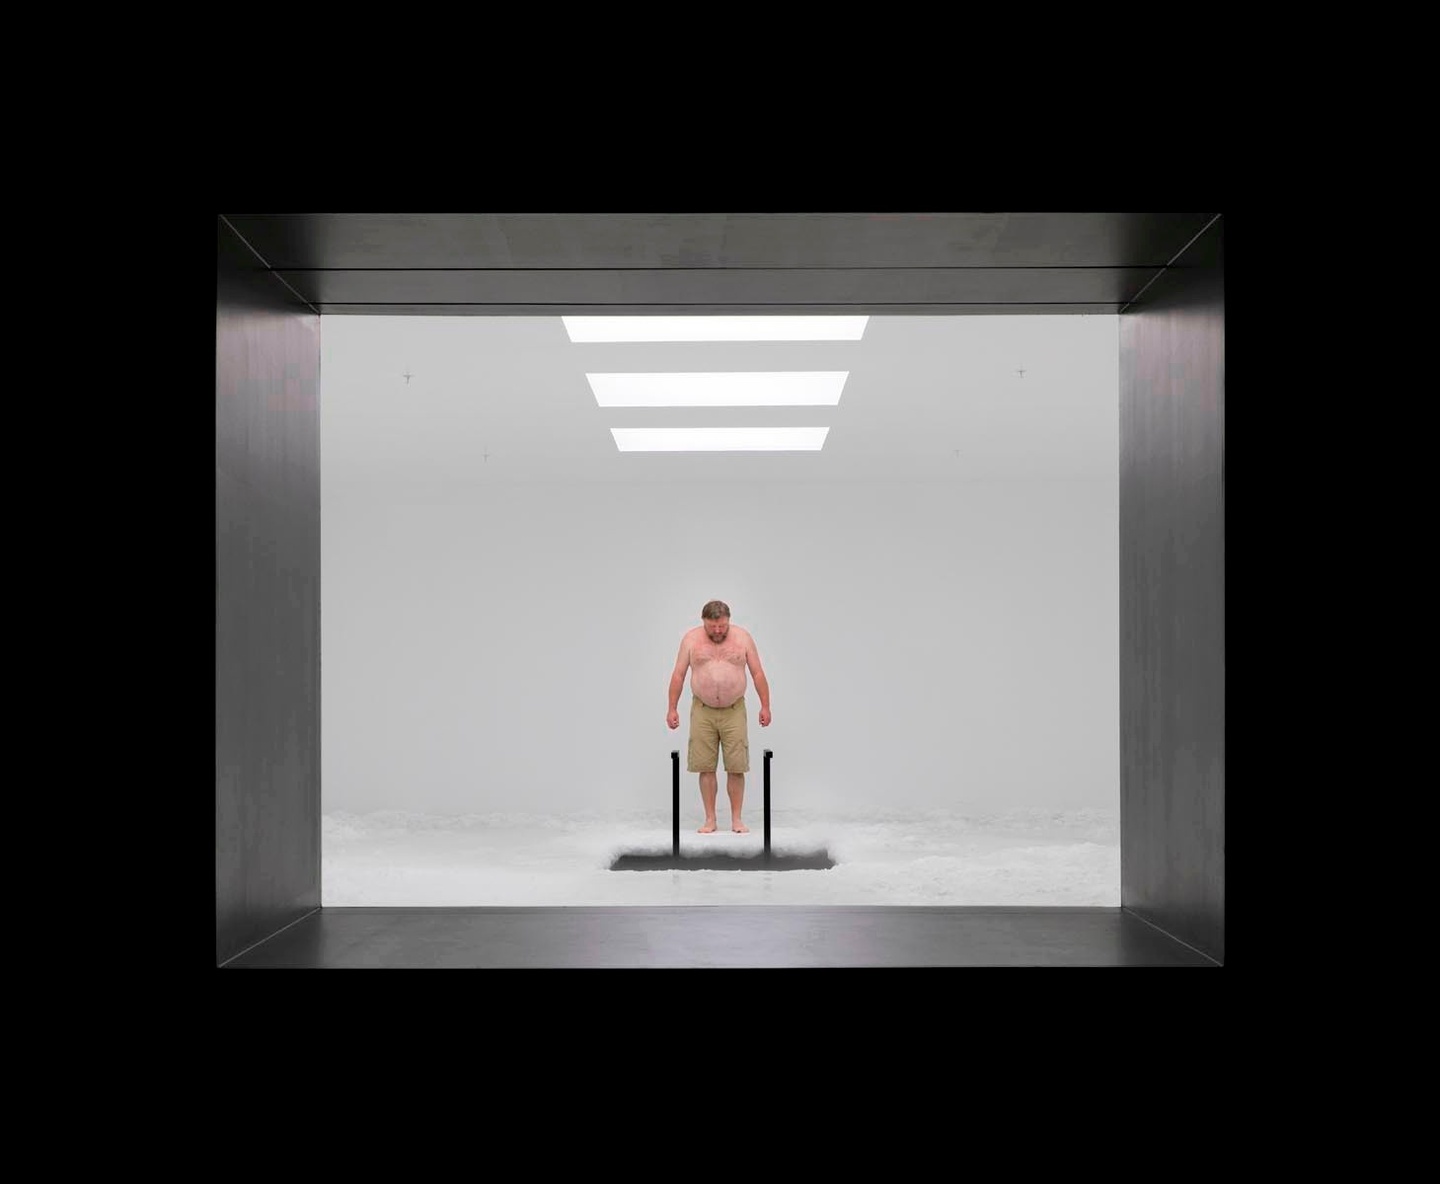 A black frame around a view into threshehold of a white room with three rectangular, overhead lights. A shirtless individual is looking down at a rectangular opening in the floor, with what might be a black ladder leading into it.